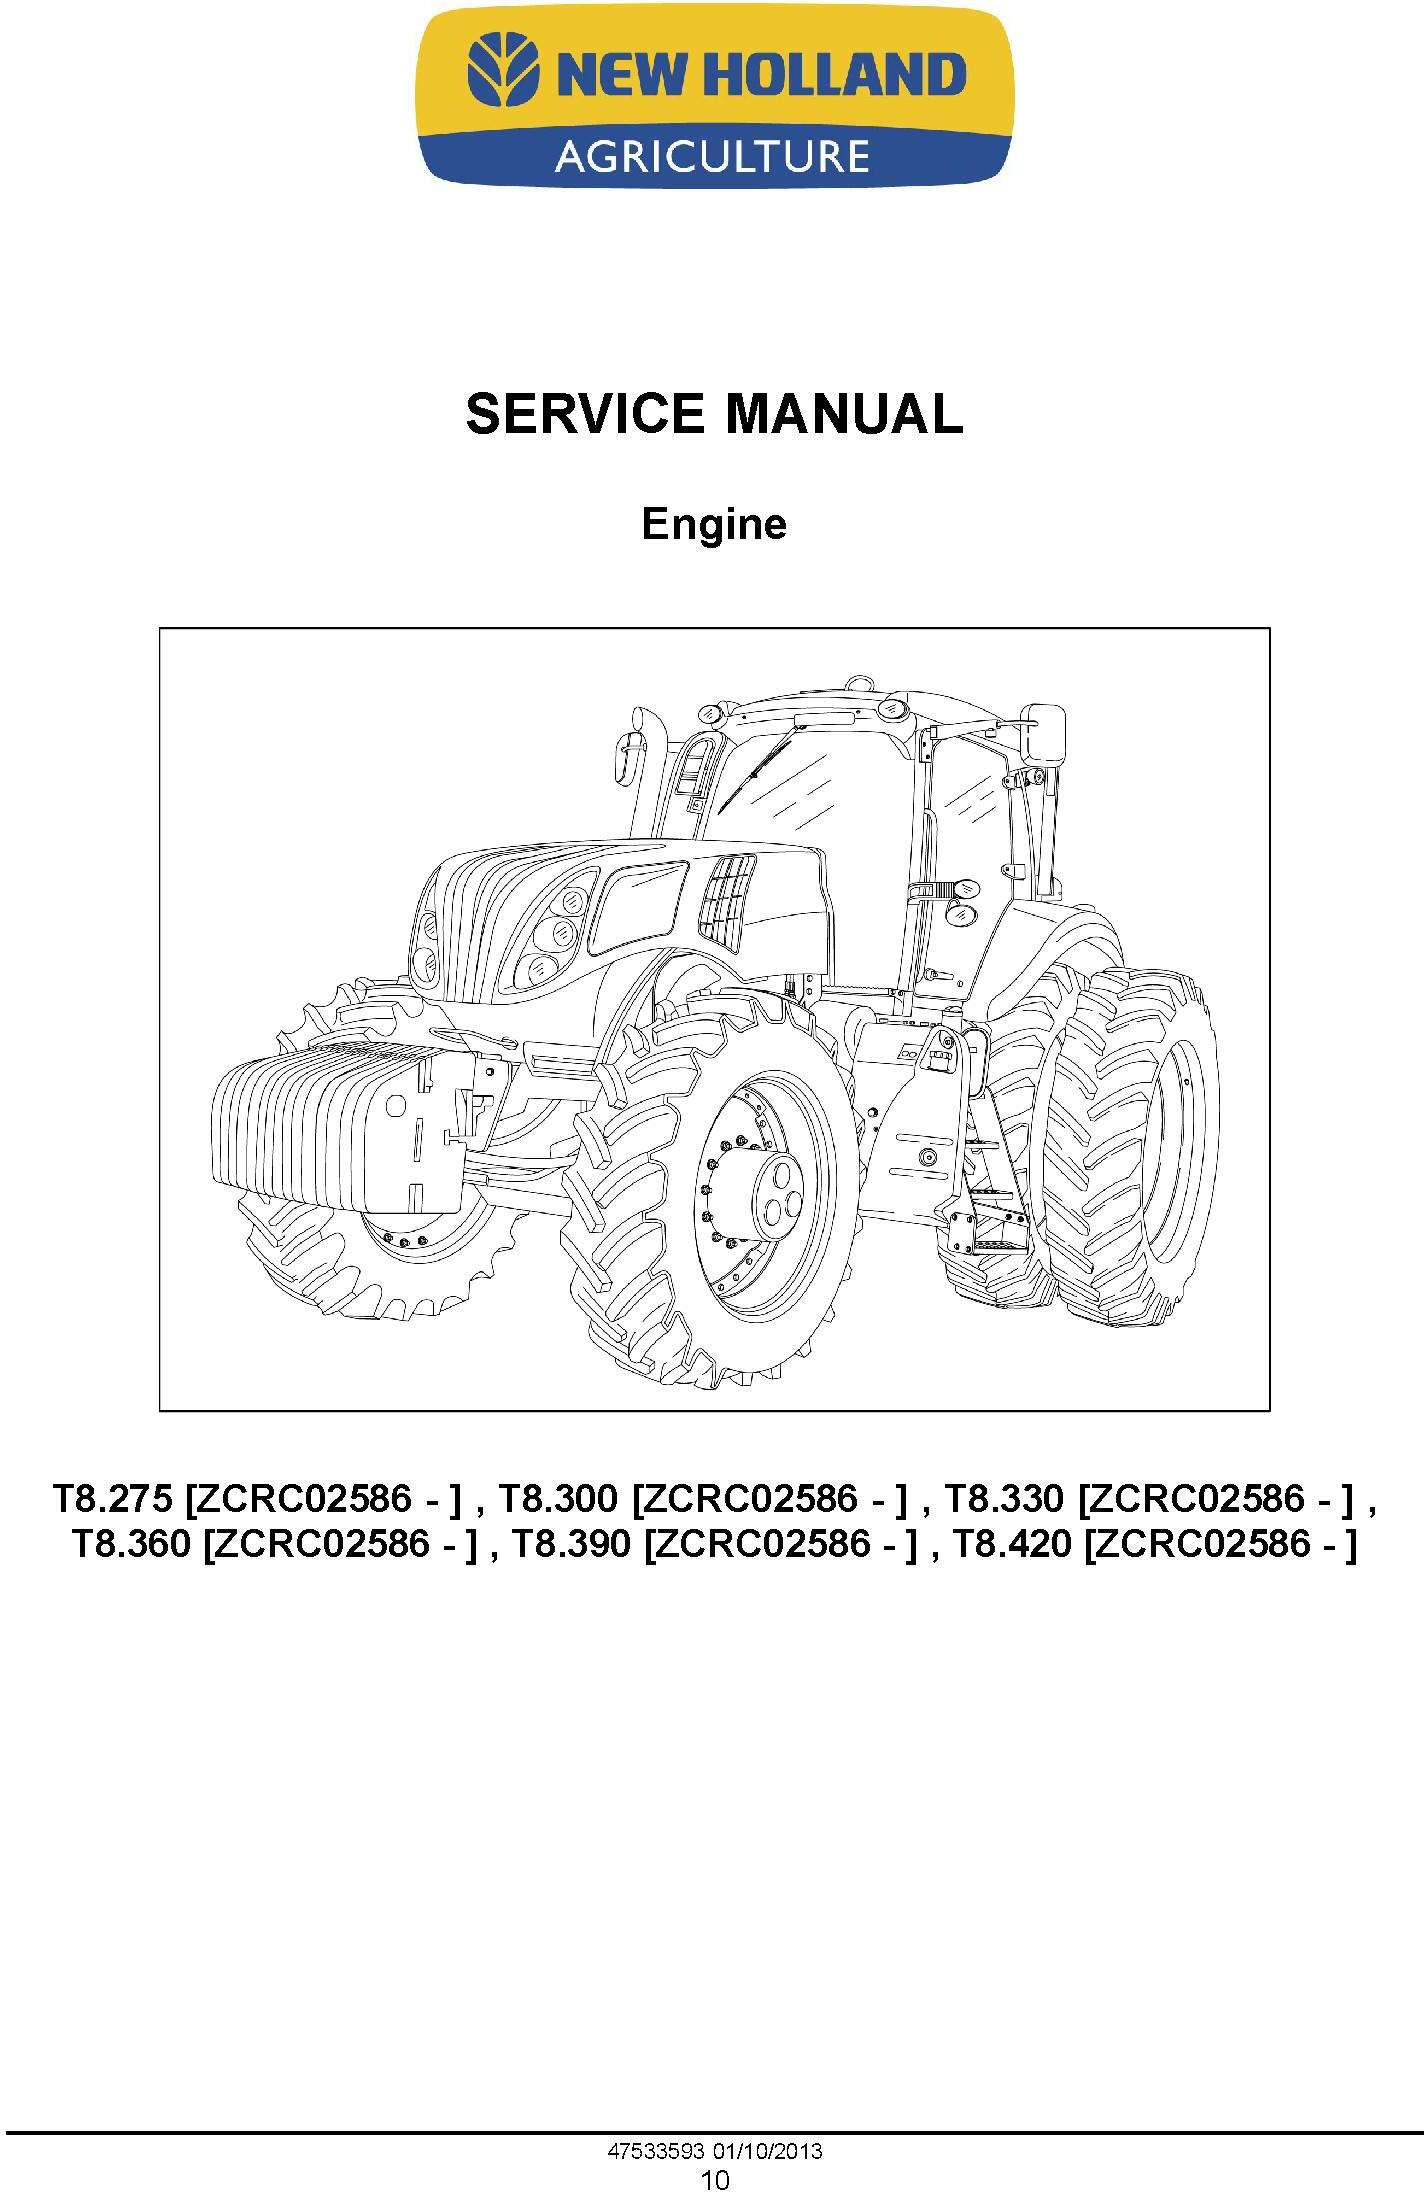 New Holland T8.275, T8.300, T8.330, T8.360, T8.390, T8.420 Tractor w.CVT Transmission Service Manual - 1